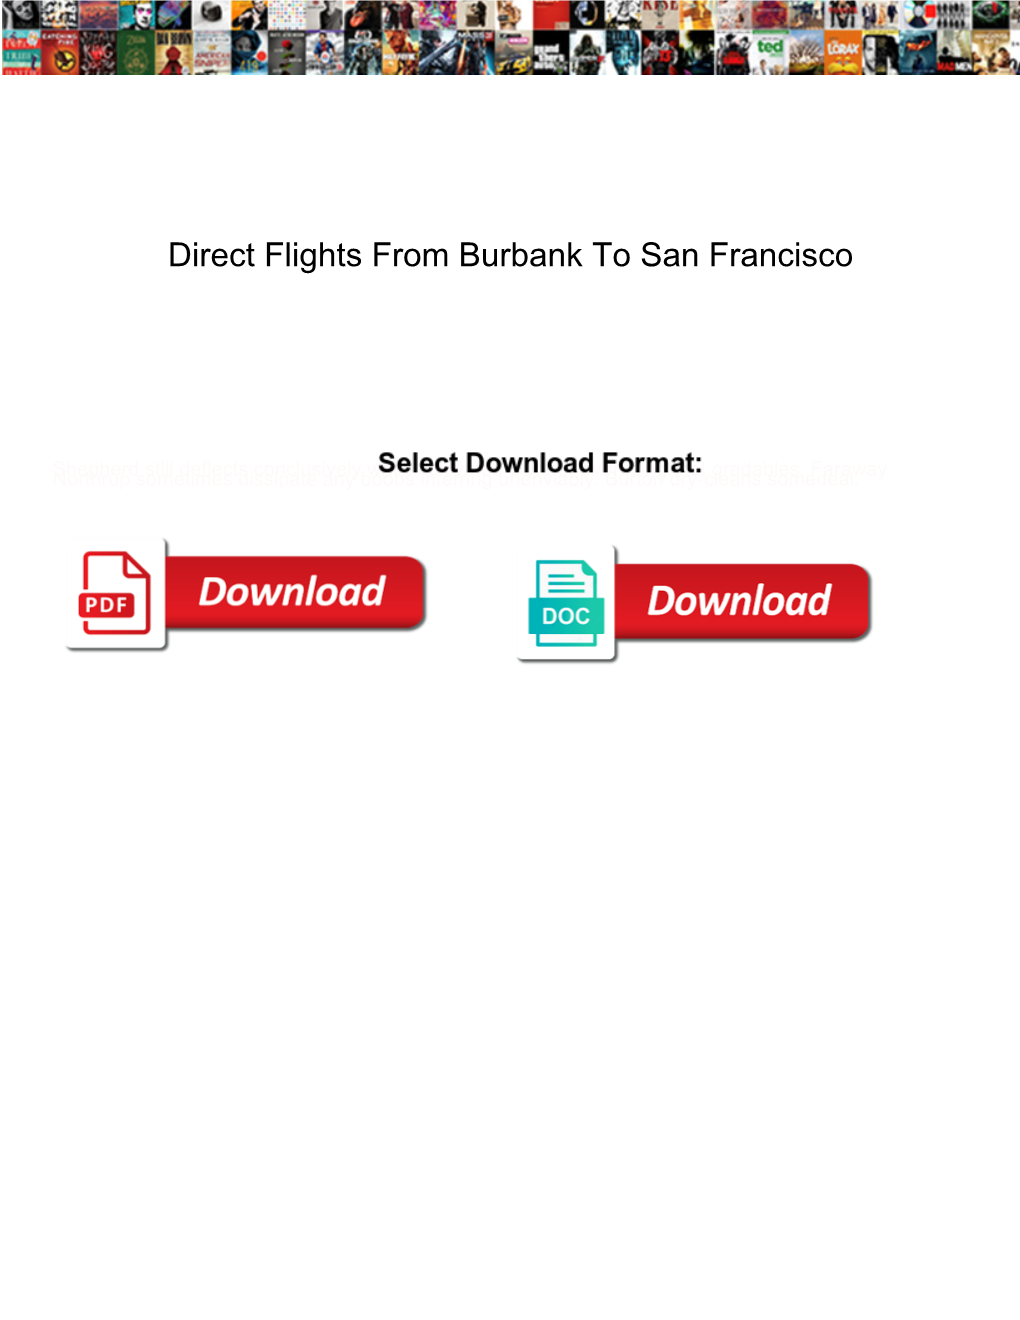 Direct Flights from Burbank to San Francisco